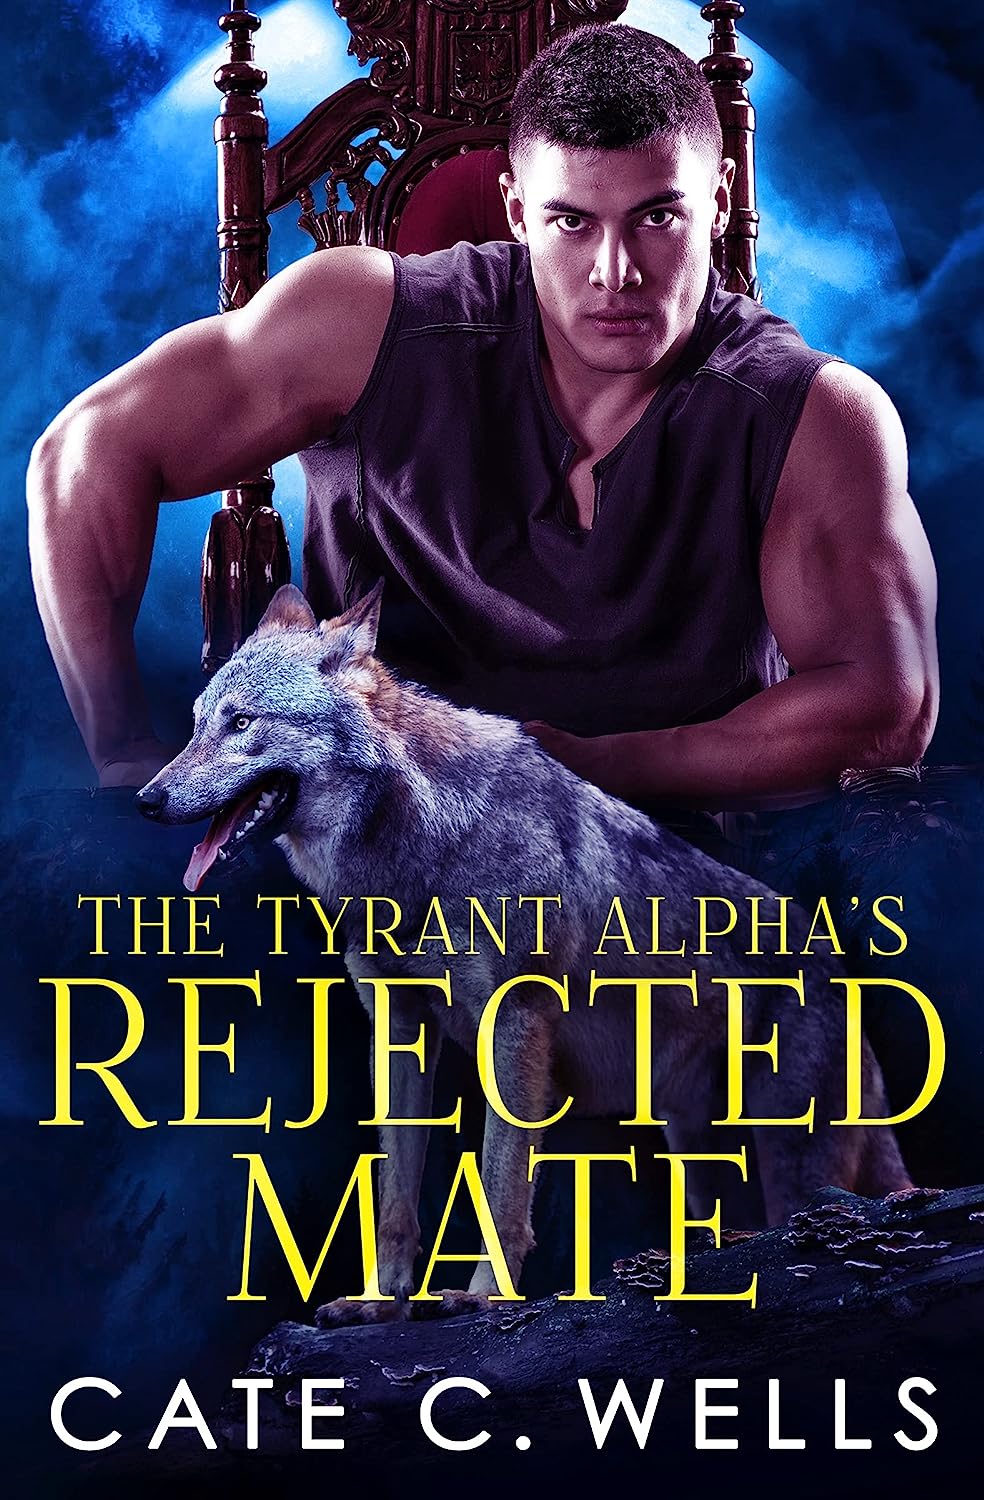 The Tyrants Alpha’s Rejected Mate by Cate C. Wells